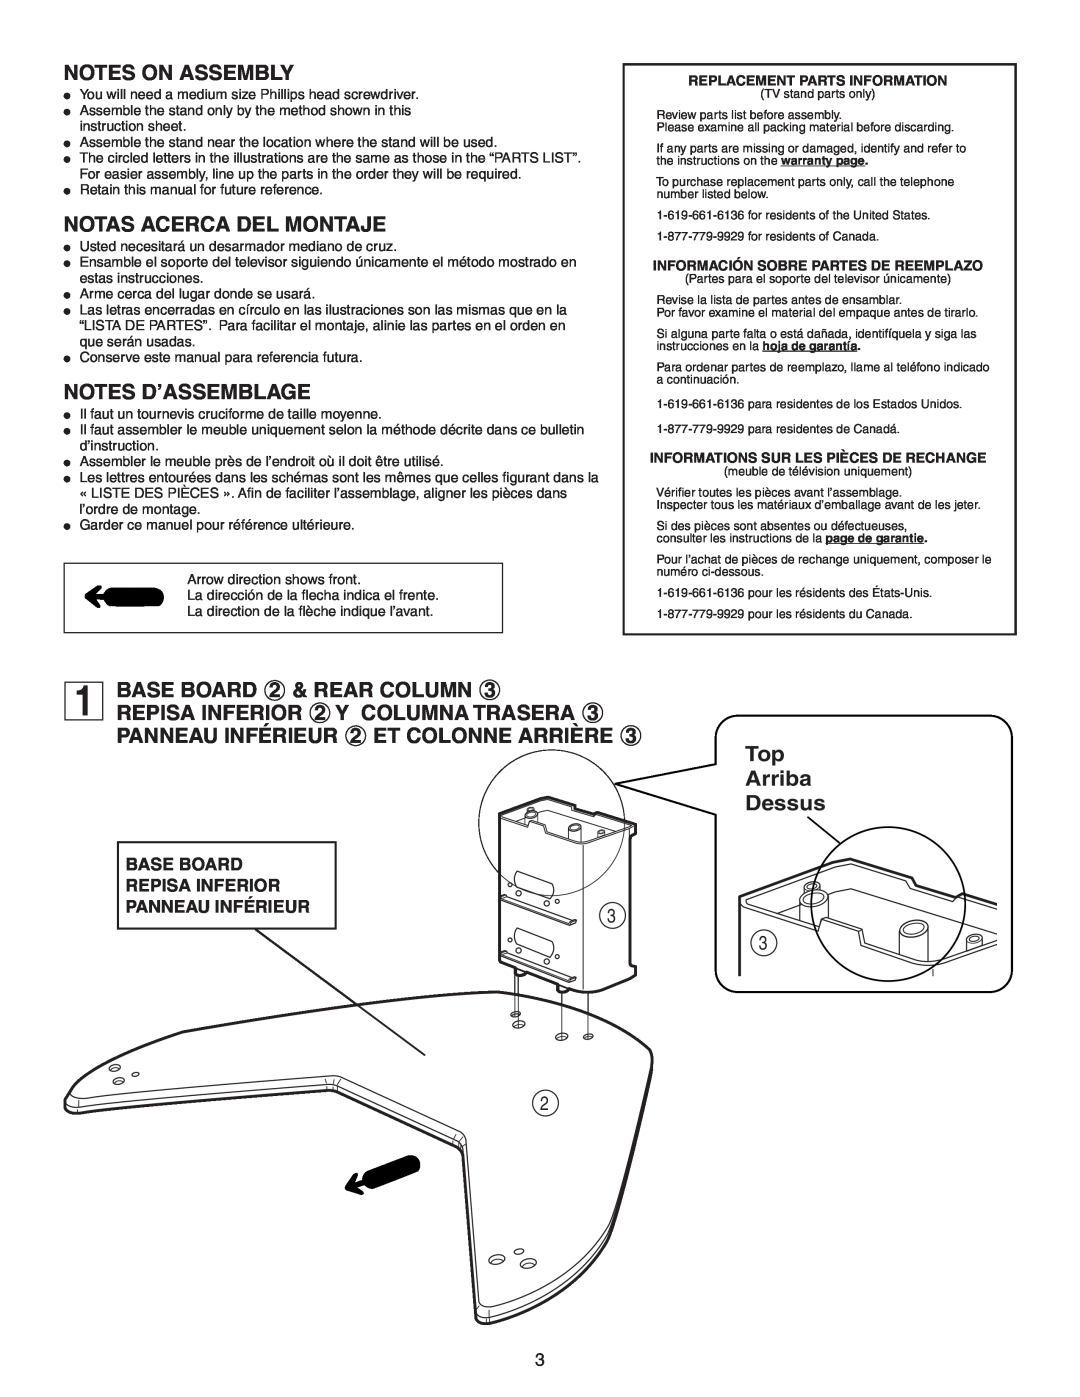 Sony SU-30HX1 Notes On Assembly, Notas Acerca Del Montaje, Notes D’Assemblage, BASE BOARD 2 & REAR COLUMN, Arriba, Dessus 